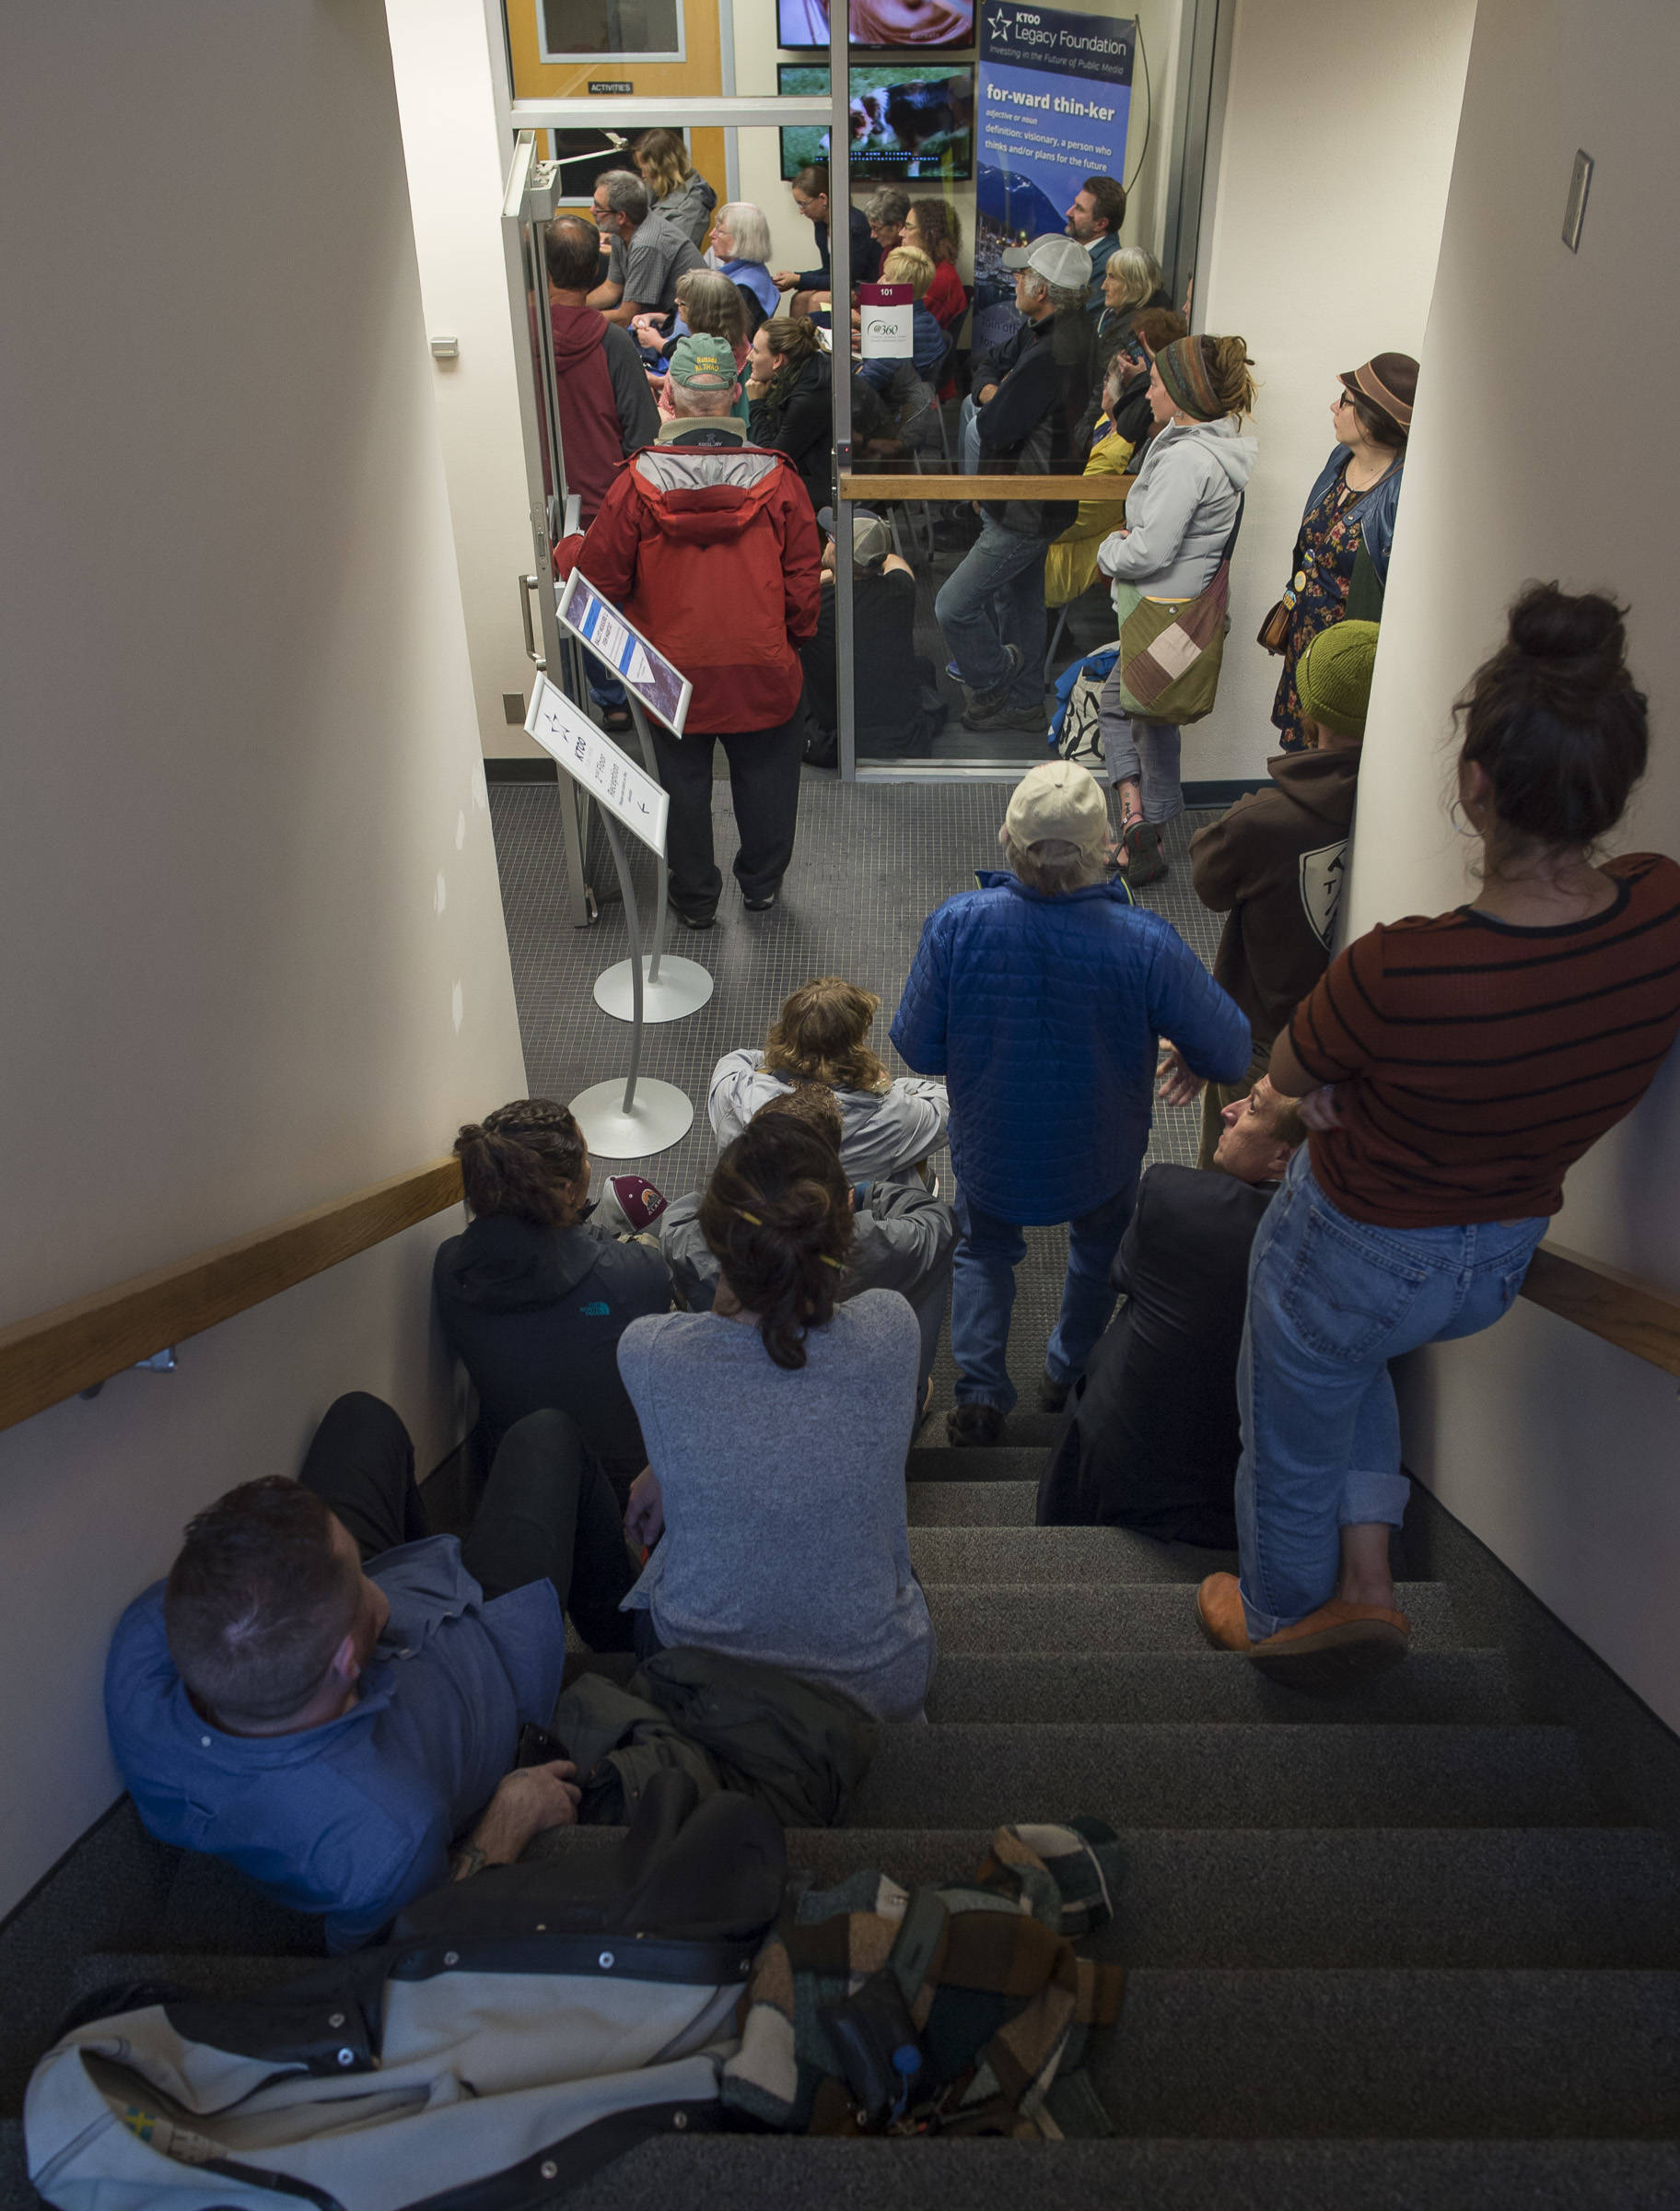 Interested members of the public overflow multiple rooms to listen to a forum on Ballot Measure 1 at @360 Studio on Monday, Aug. 27, 2018. The forum was sponsored by the Juneau Economic Development Council, KTOO and the Juneau Empire. (Michael Penn | Juneau Empire)